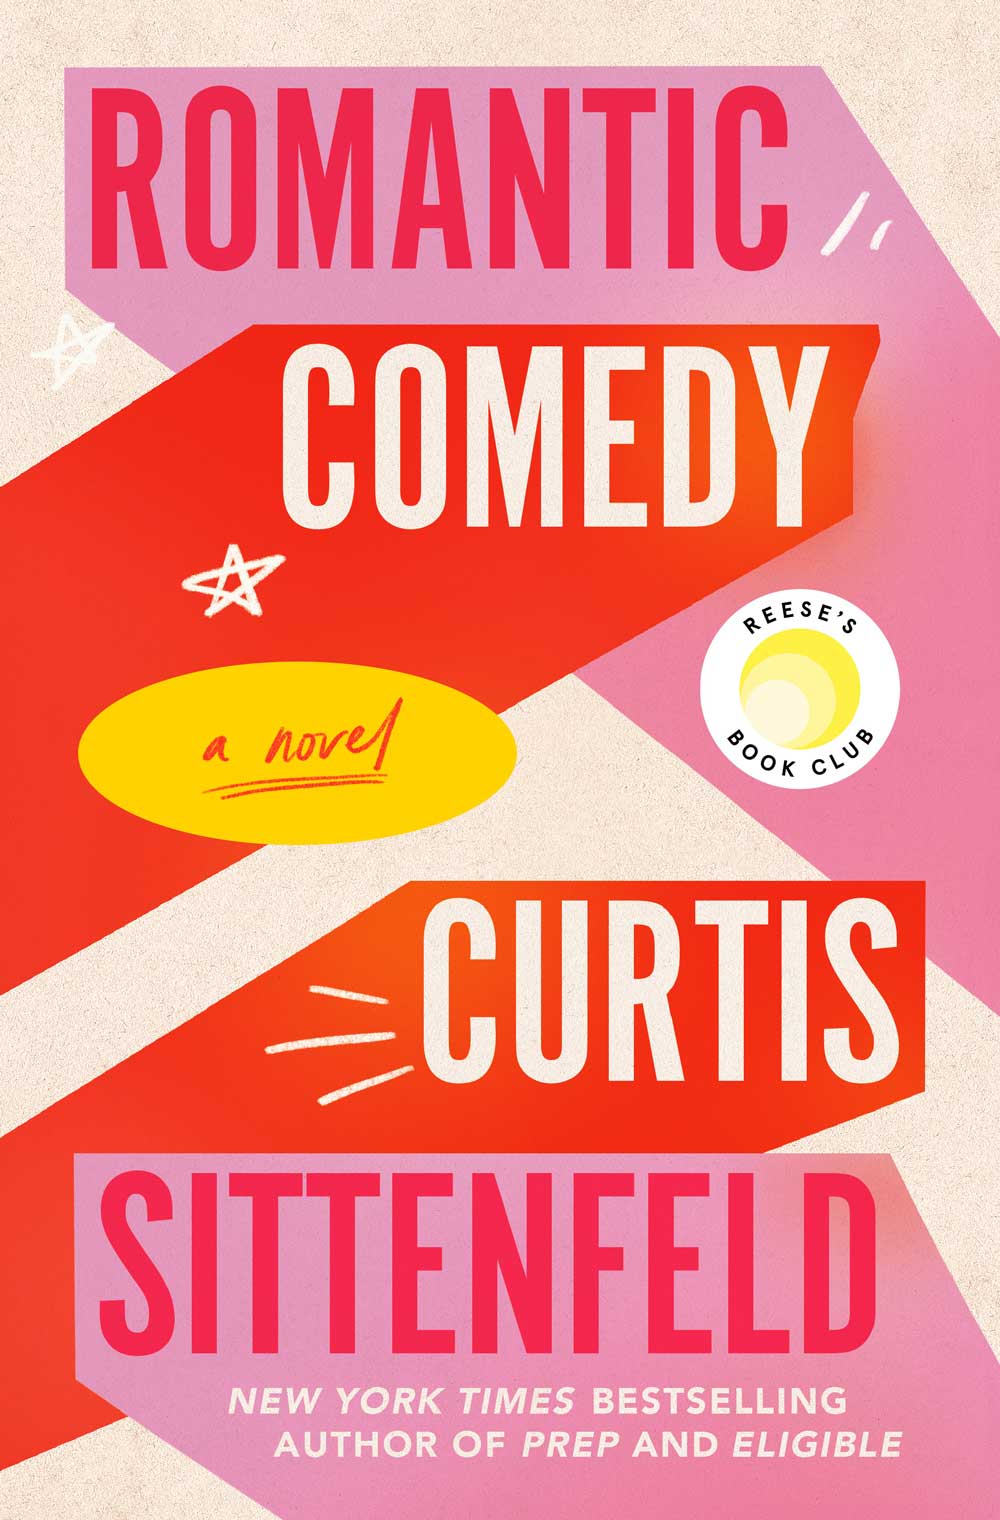 Book cover of Romantic Comedy with pink and orange art.